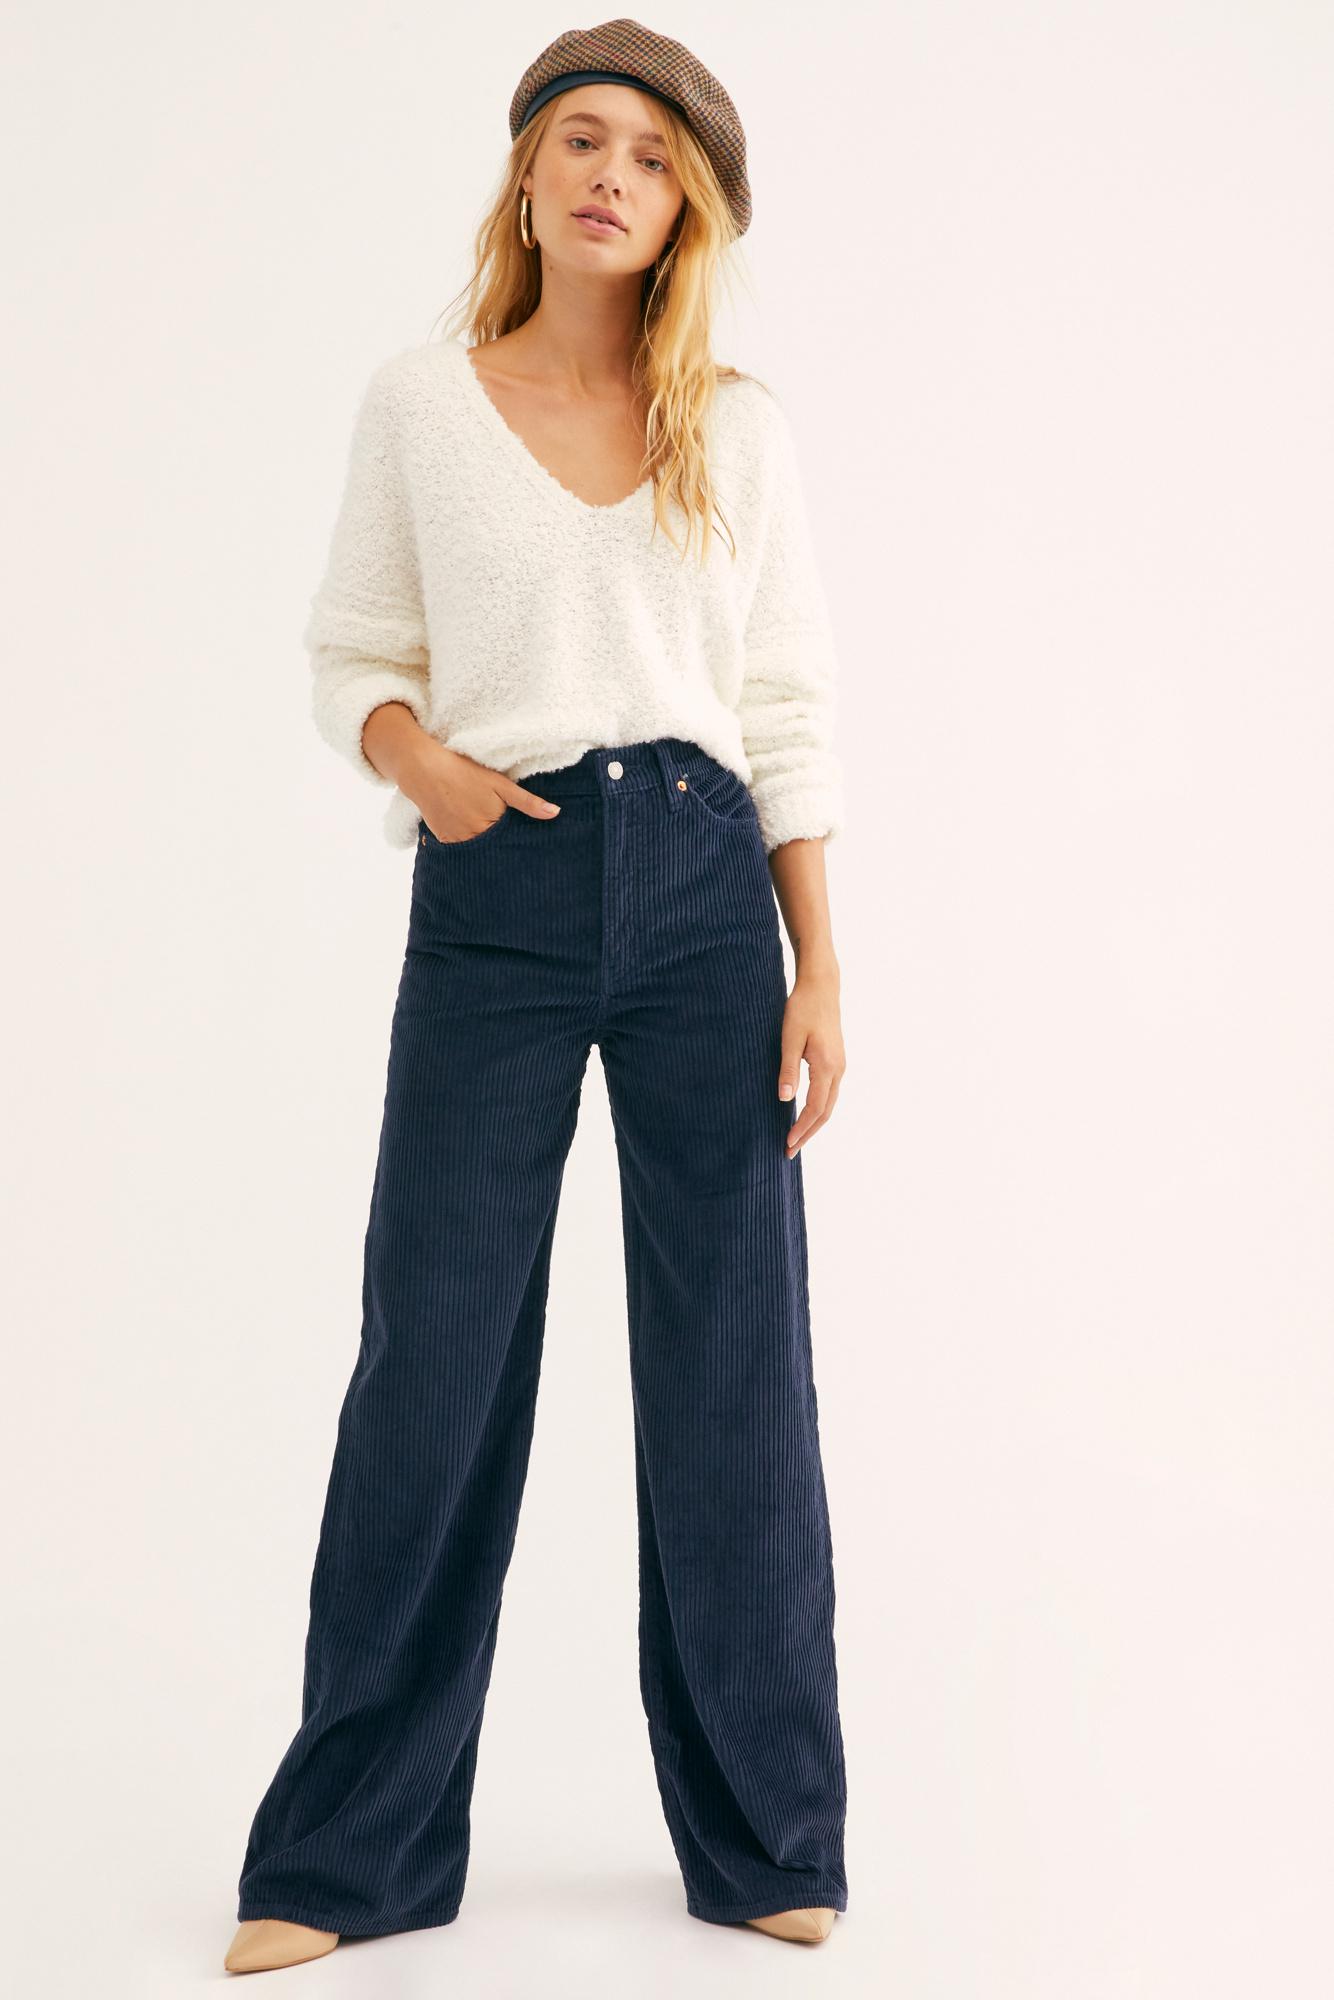 Free People Corduroy Levi's Ribcage Cord Wide-leg Pants in Blue - Lyst